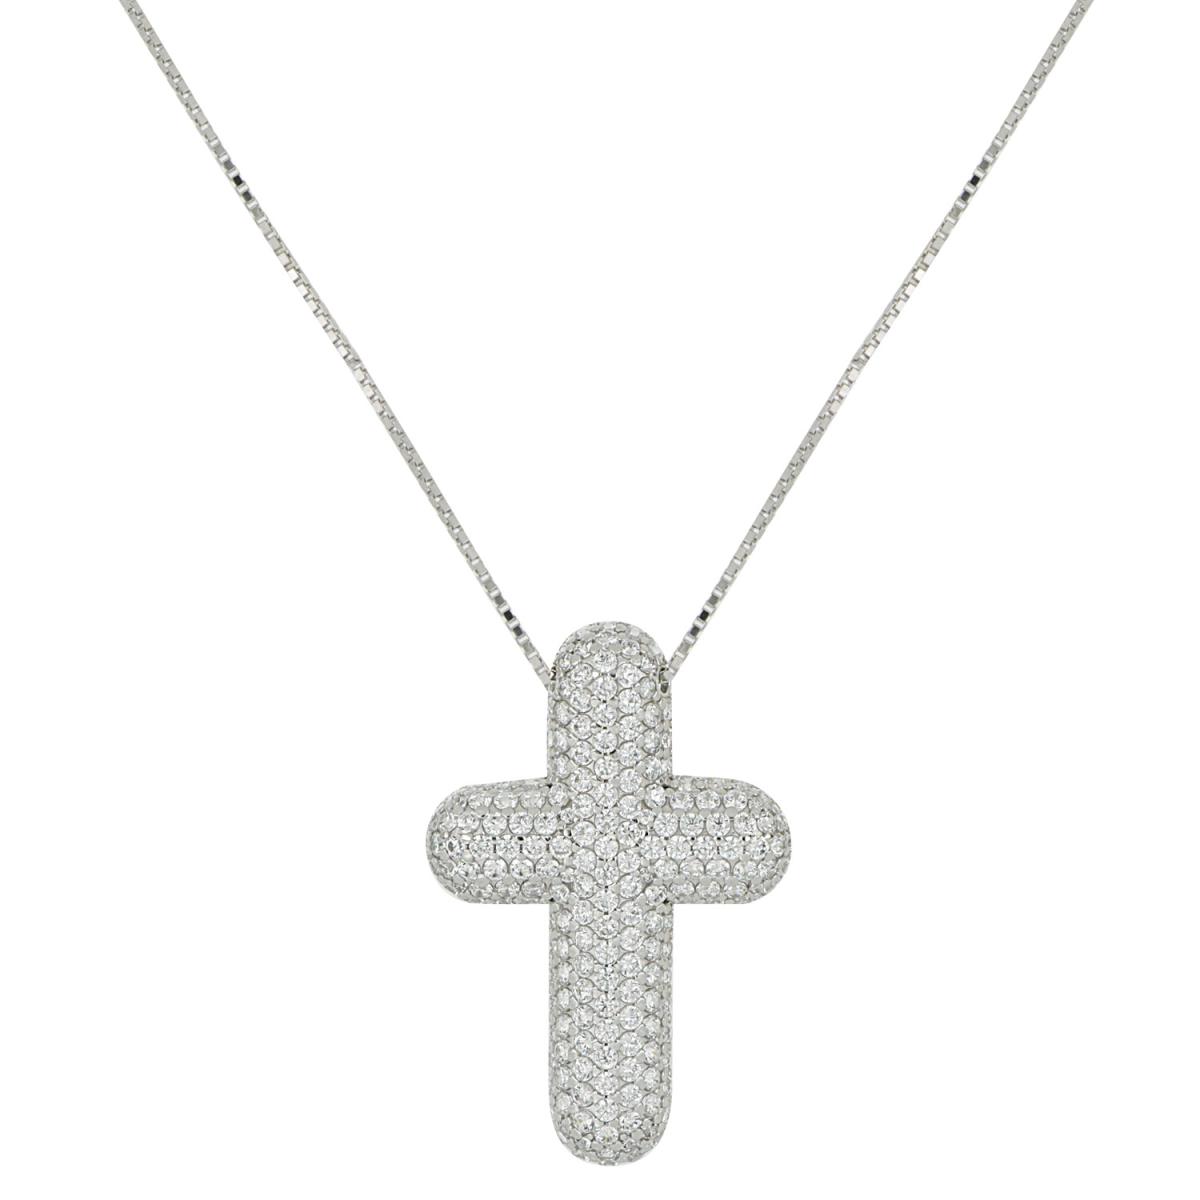 Cross necklace in 925 rhodium silver with white zircons - ZCL1404/BI-LB